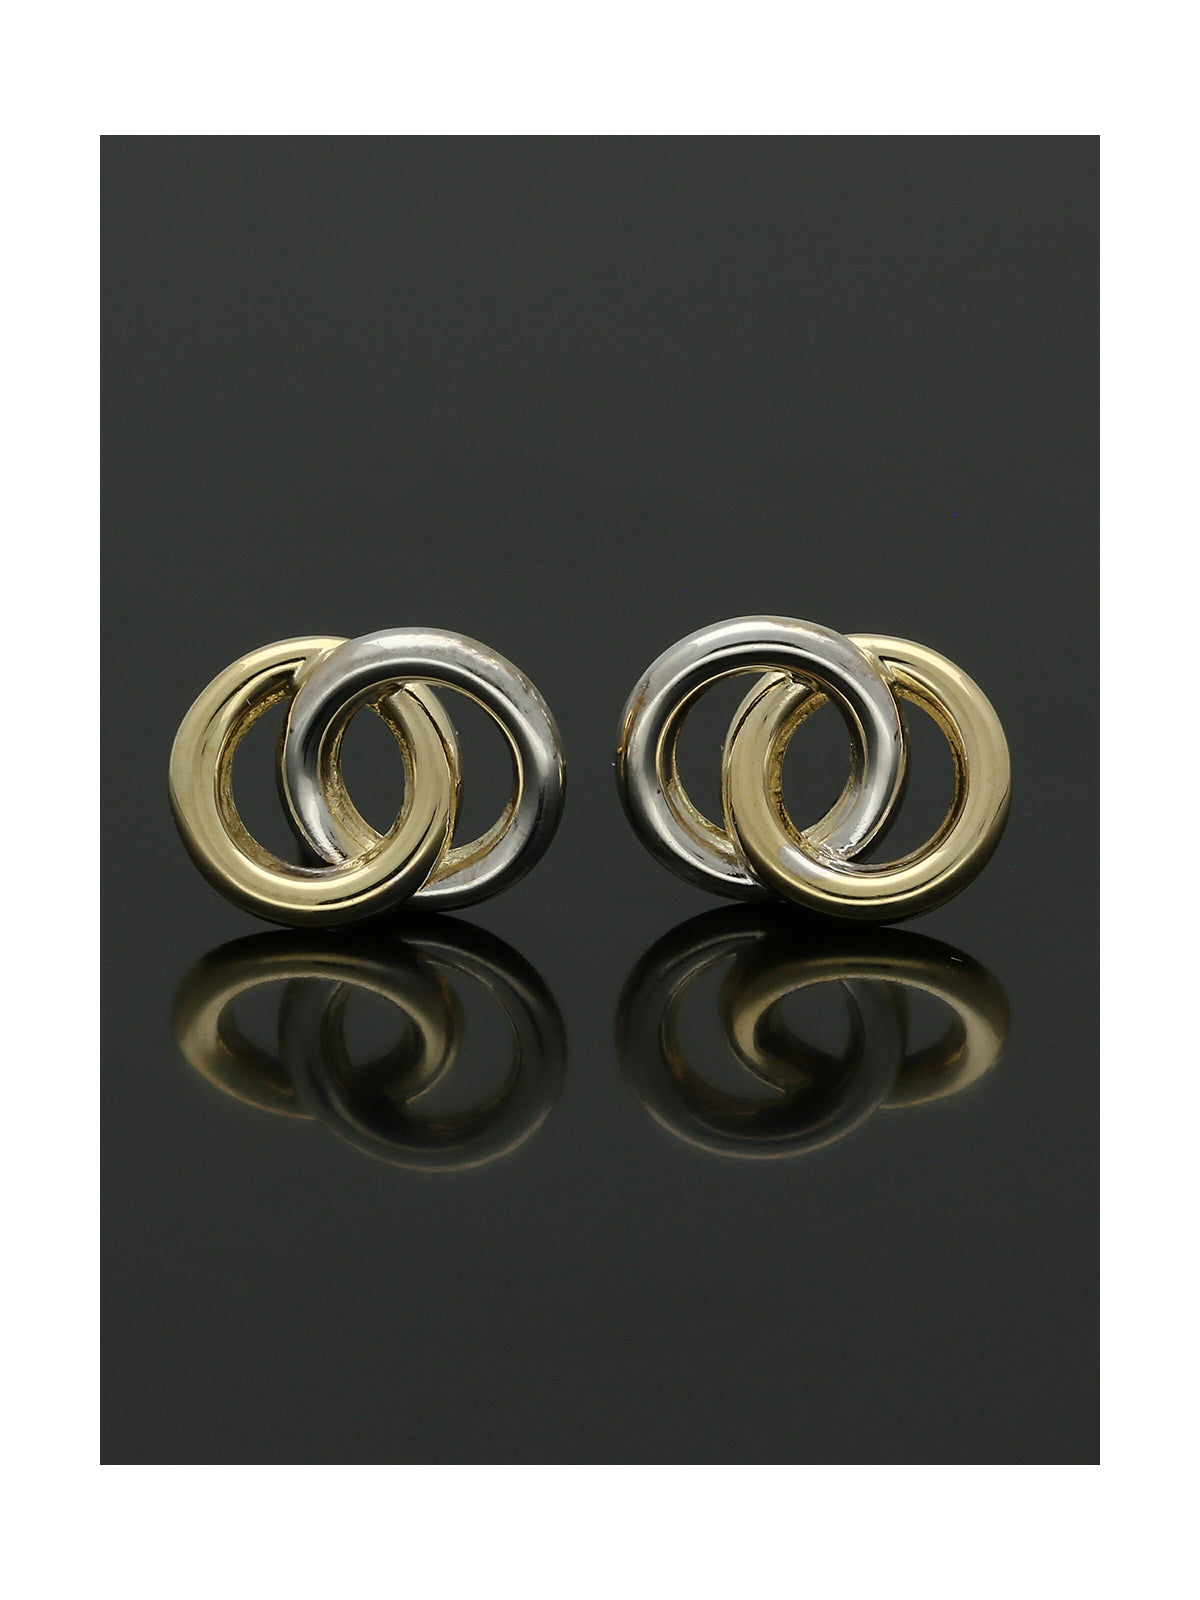 Linked Ring Stud Earrings in 9ct Yellow & White Gold